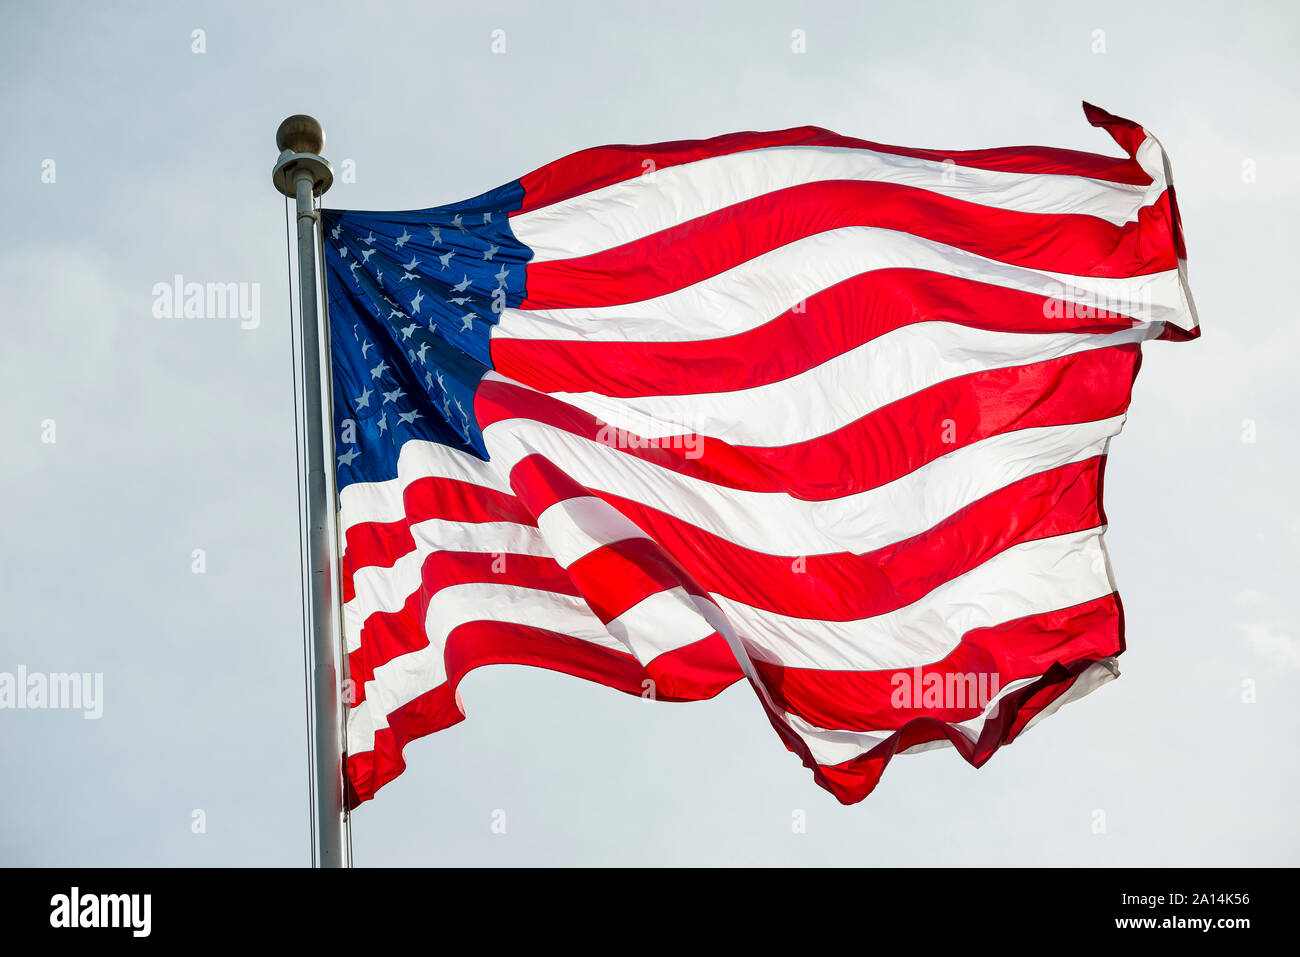 The American flag waves in the wind. Stock Photo